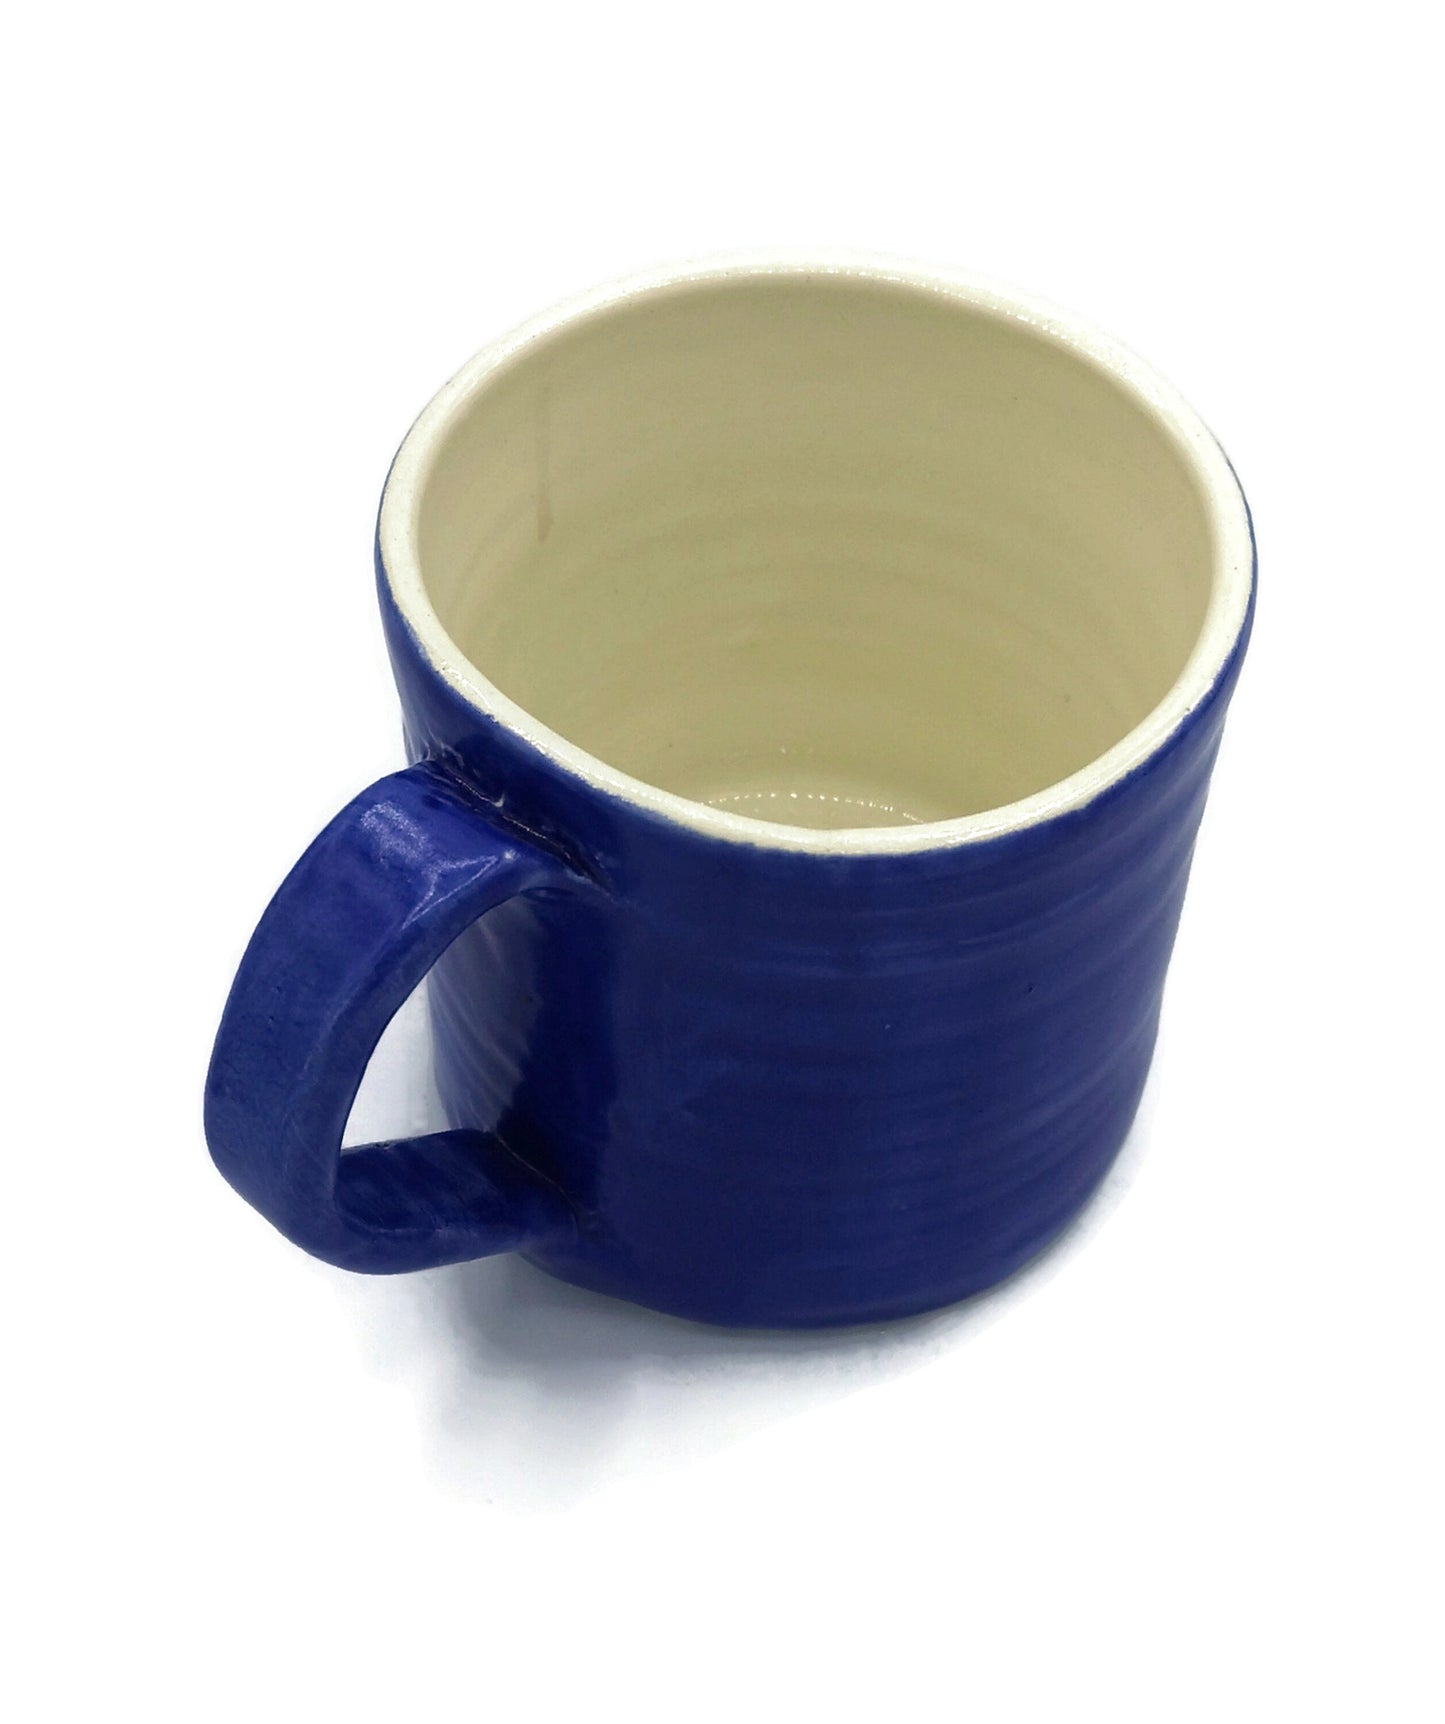 Large Handmade Ceramic Mug, Royal Blue Pottery Cool Coffee Mugs, Unique Coffee Lover Gift For Men Who Have Everything - Ceramica Ana Rafael